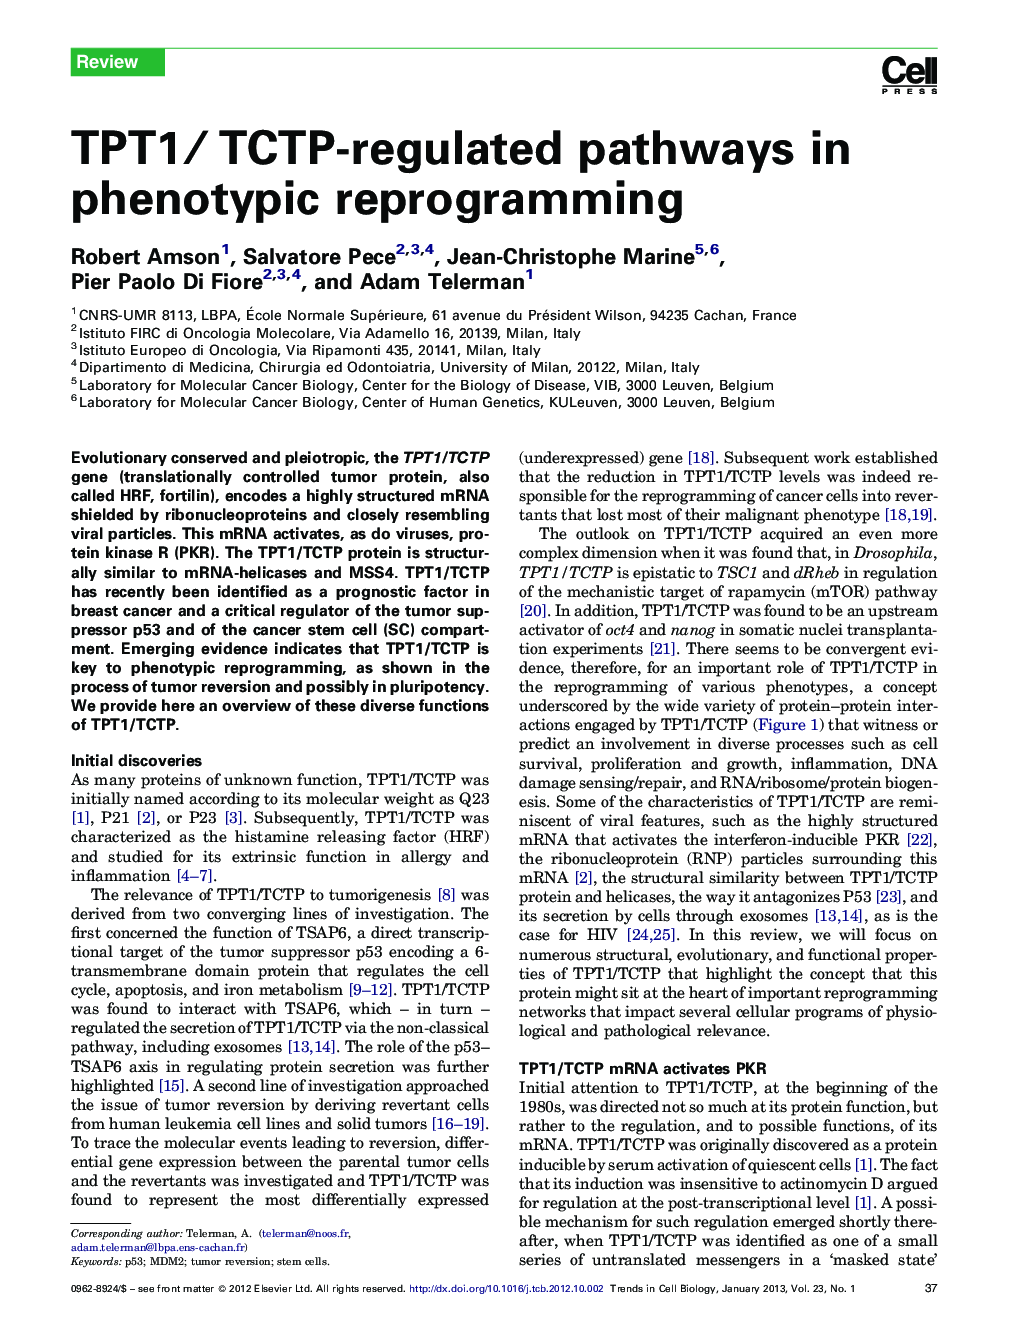 TPT1/ TCTP-regulated pathways in phenotypic reprogramming